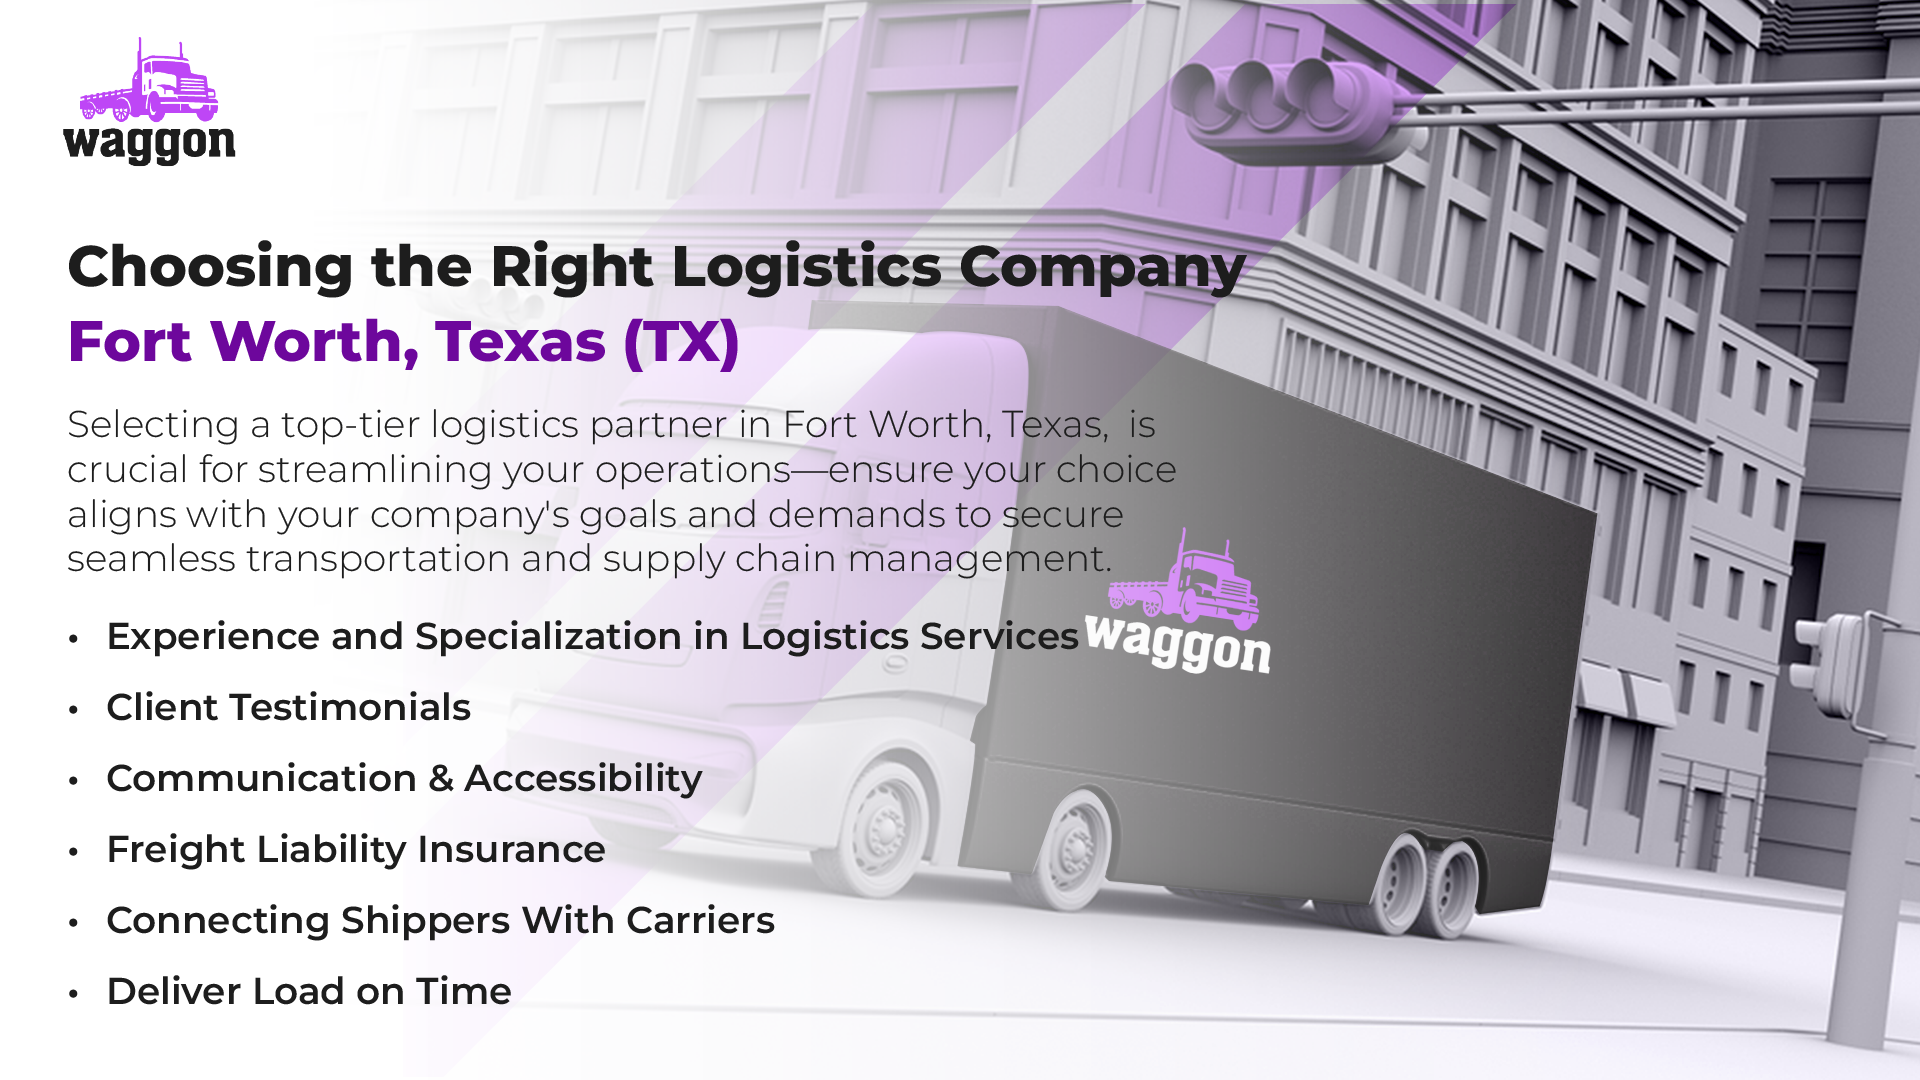 Choosing the Right Logistics Company in Fort Worth, Texas (TX)